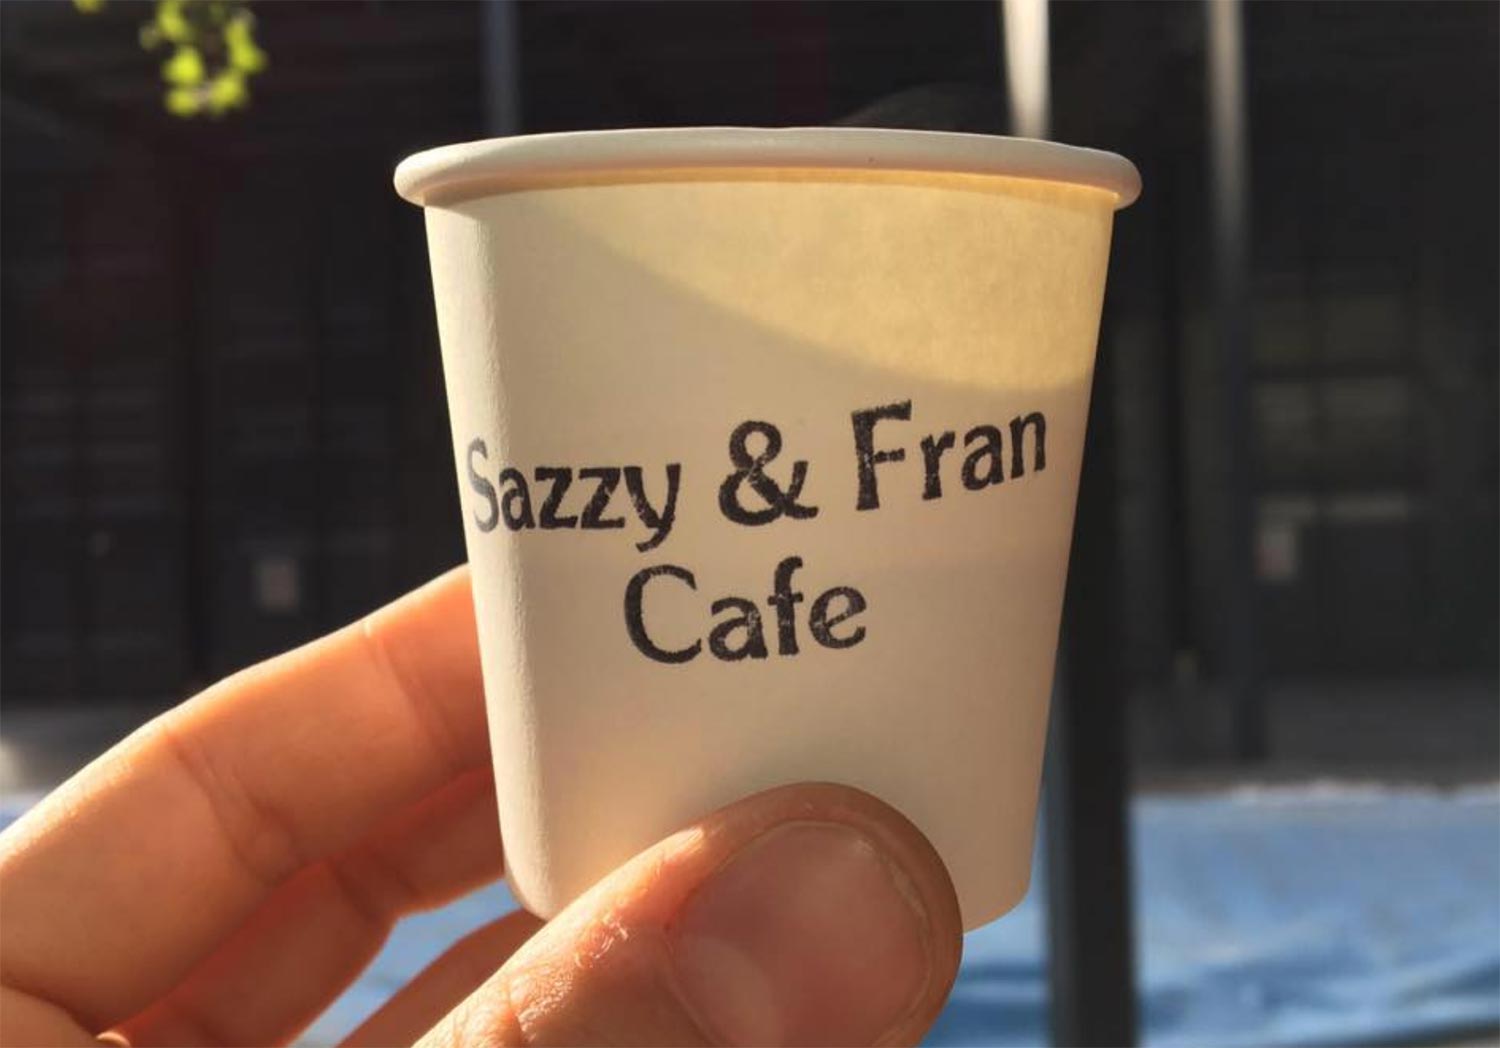 Sazzy and Fran cafe